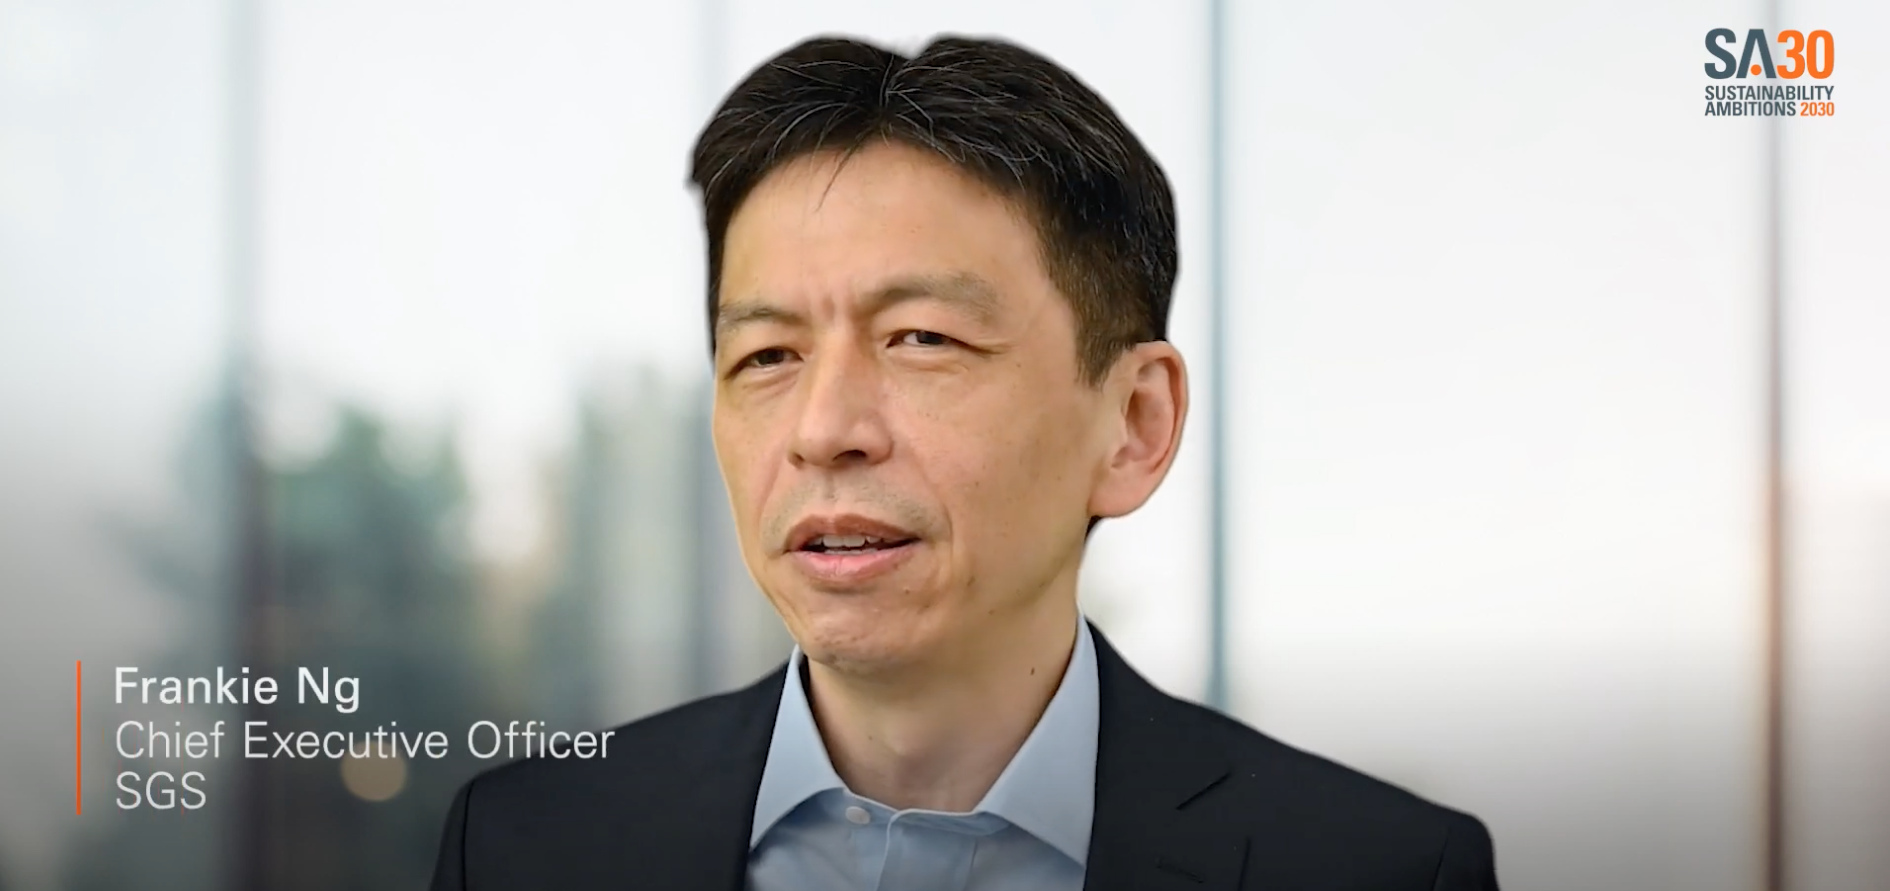 Frankie Ng [CEO of SGS]: « We are convinced that our strategies will represent a great step towards enabling a better, safer and more interconnected world »